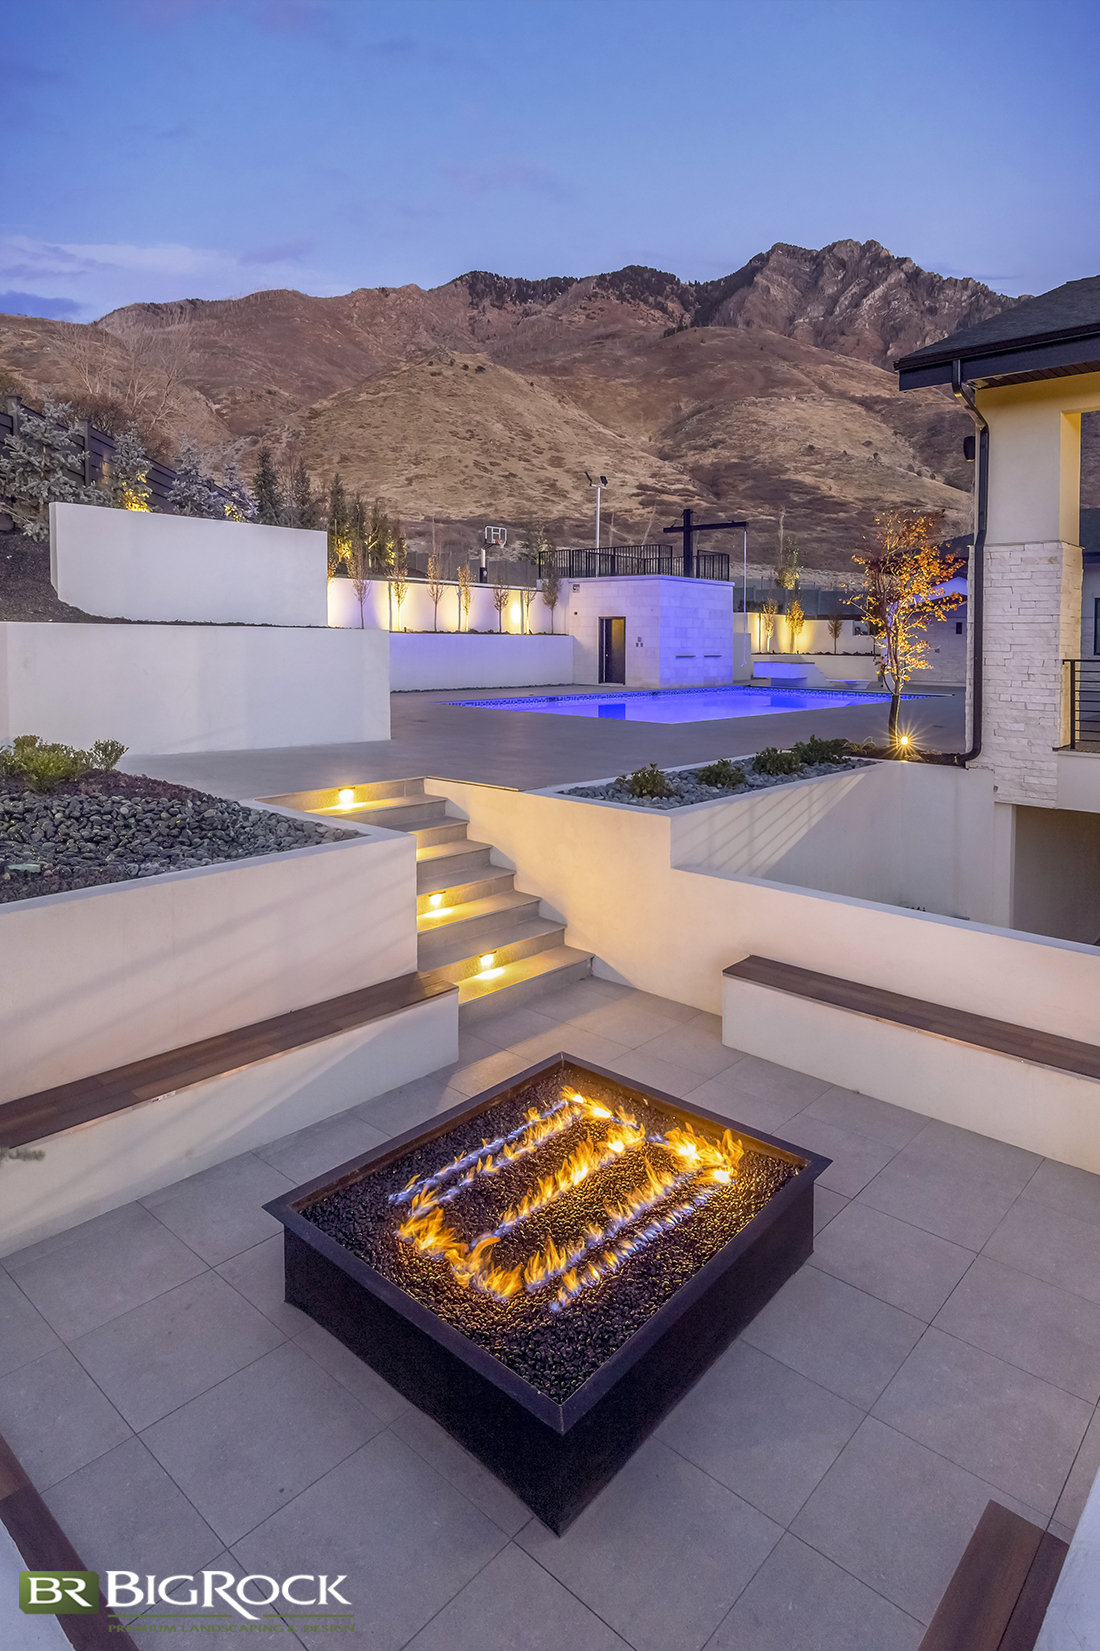 Enjoy your outdoor fire pit all night long with the perfectly placed outdoor lighting for fire pit landscaping in your backyard.